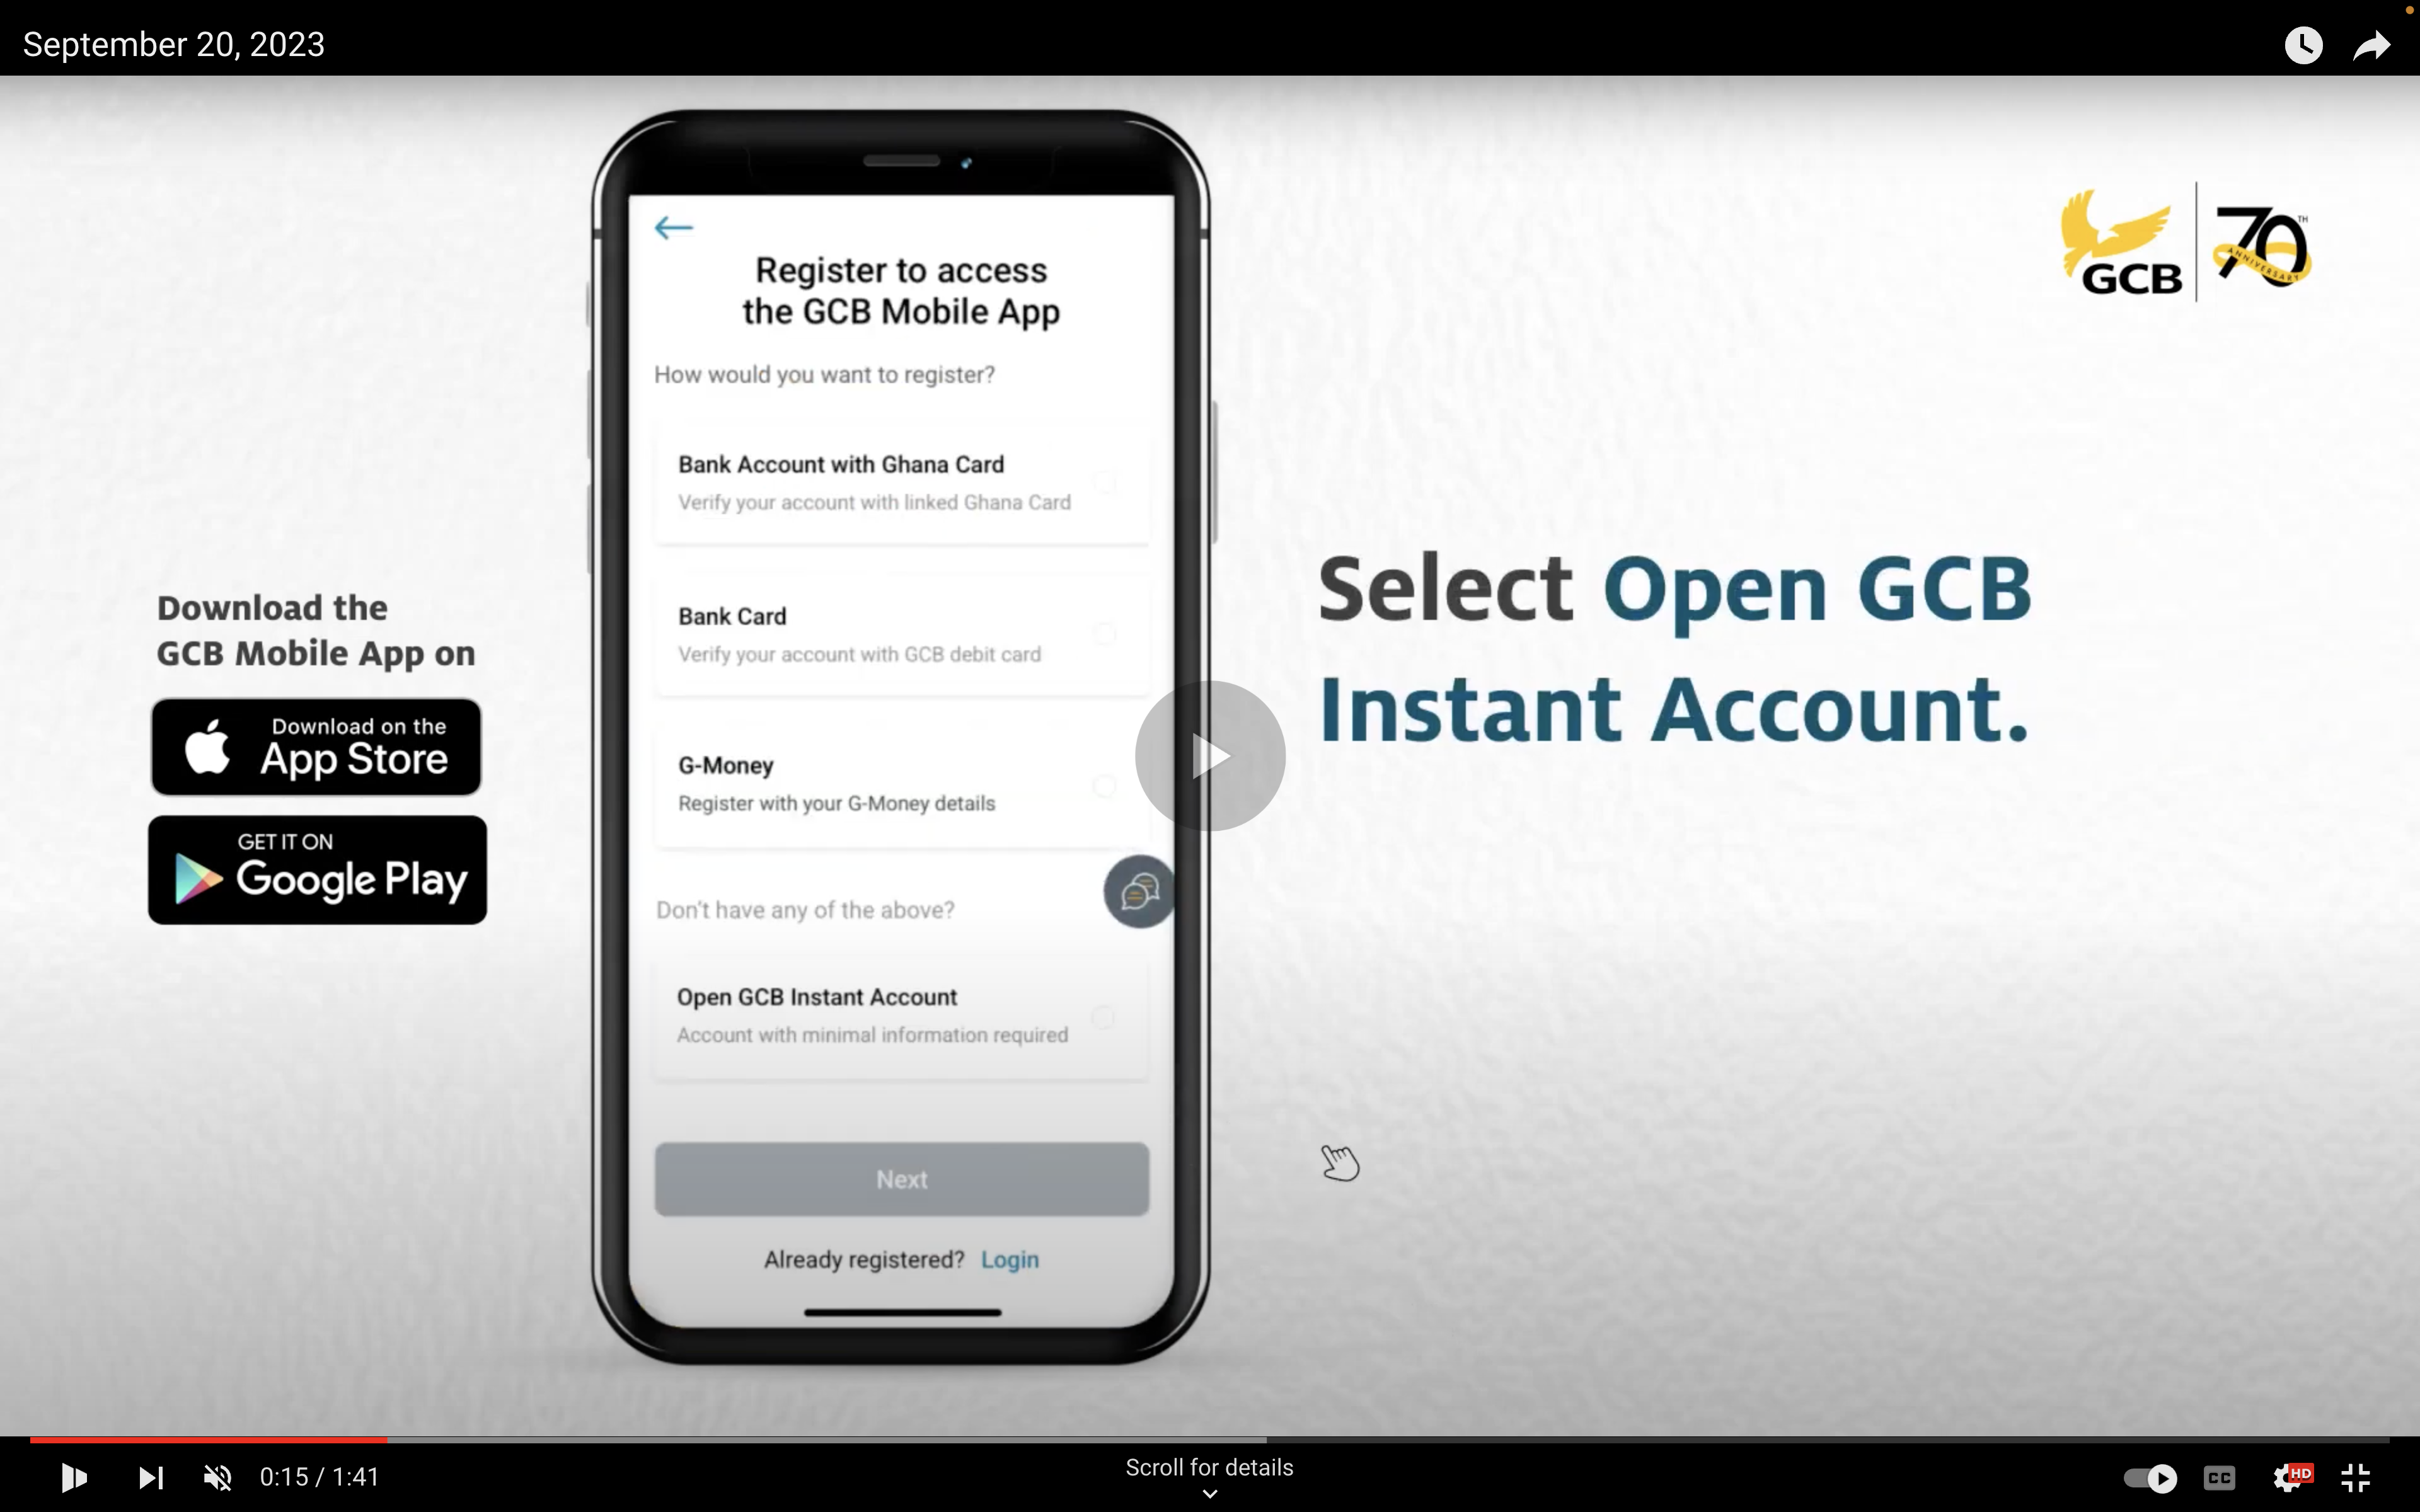 How to register using a GCB Instant Account